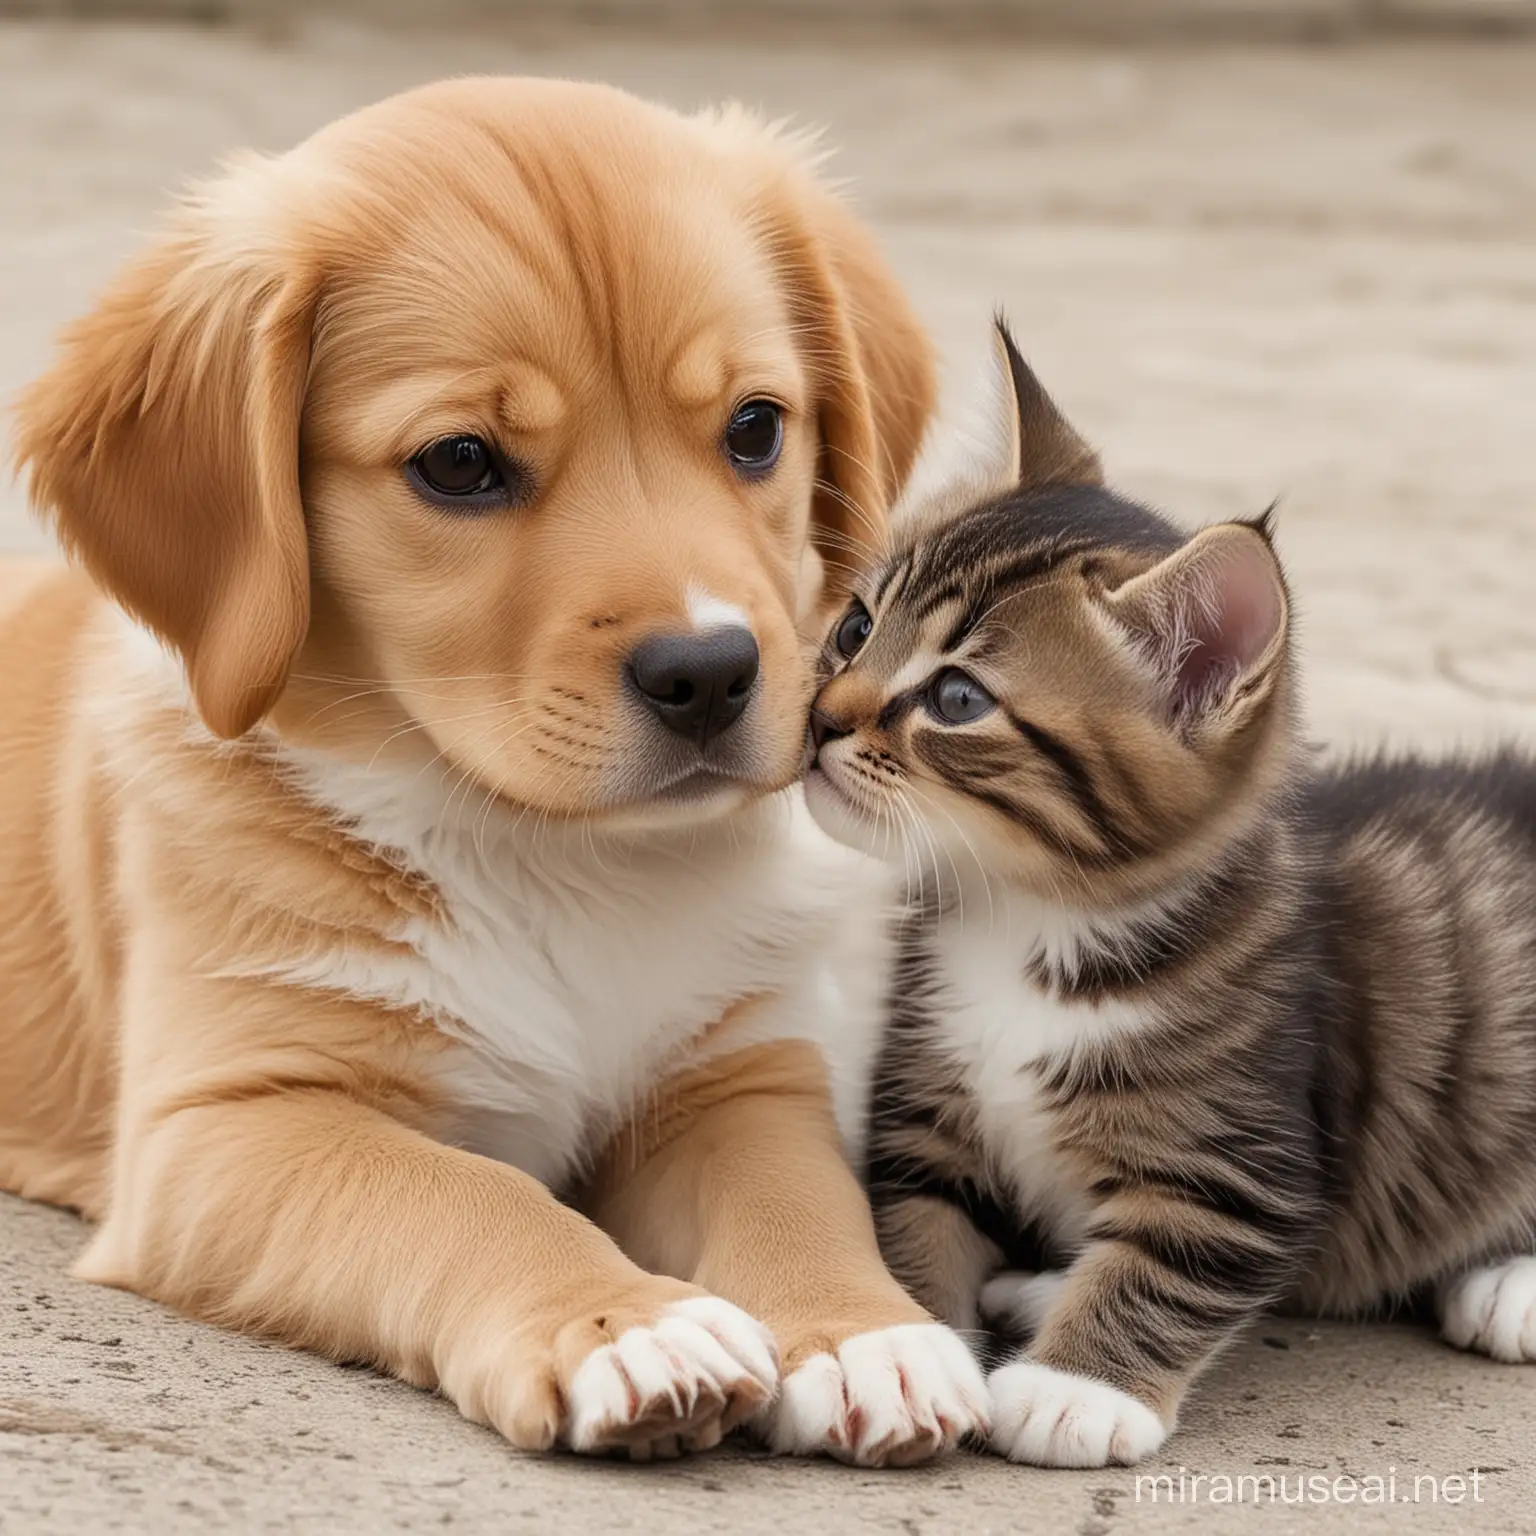 Adorable Puppy and Cat Playing Together